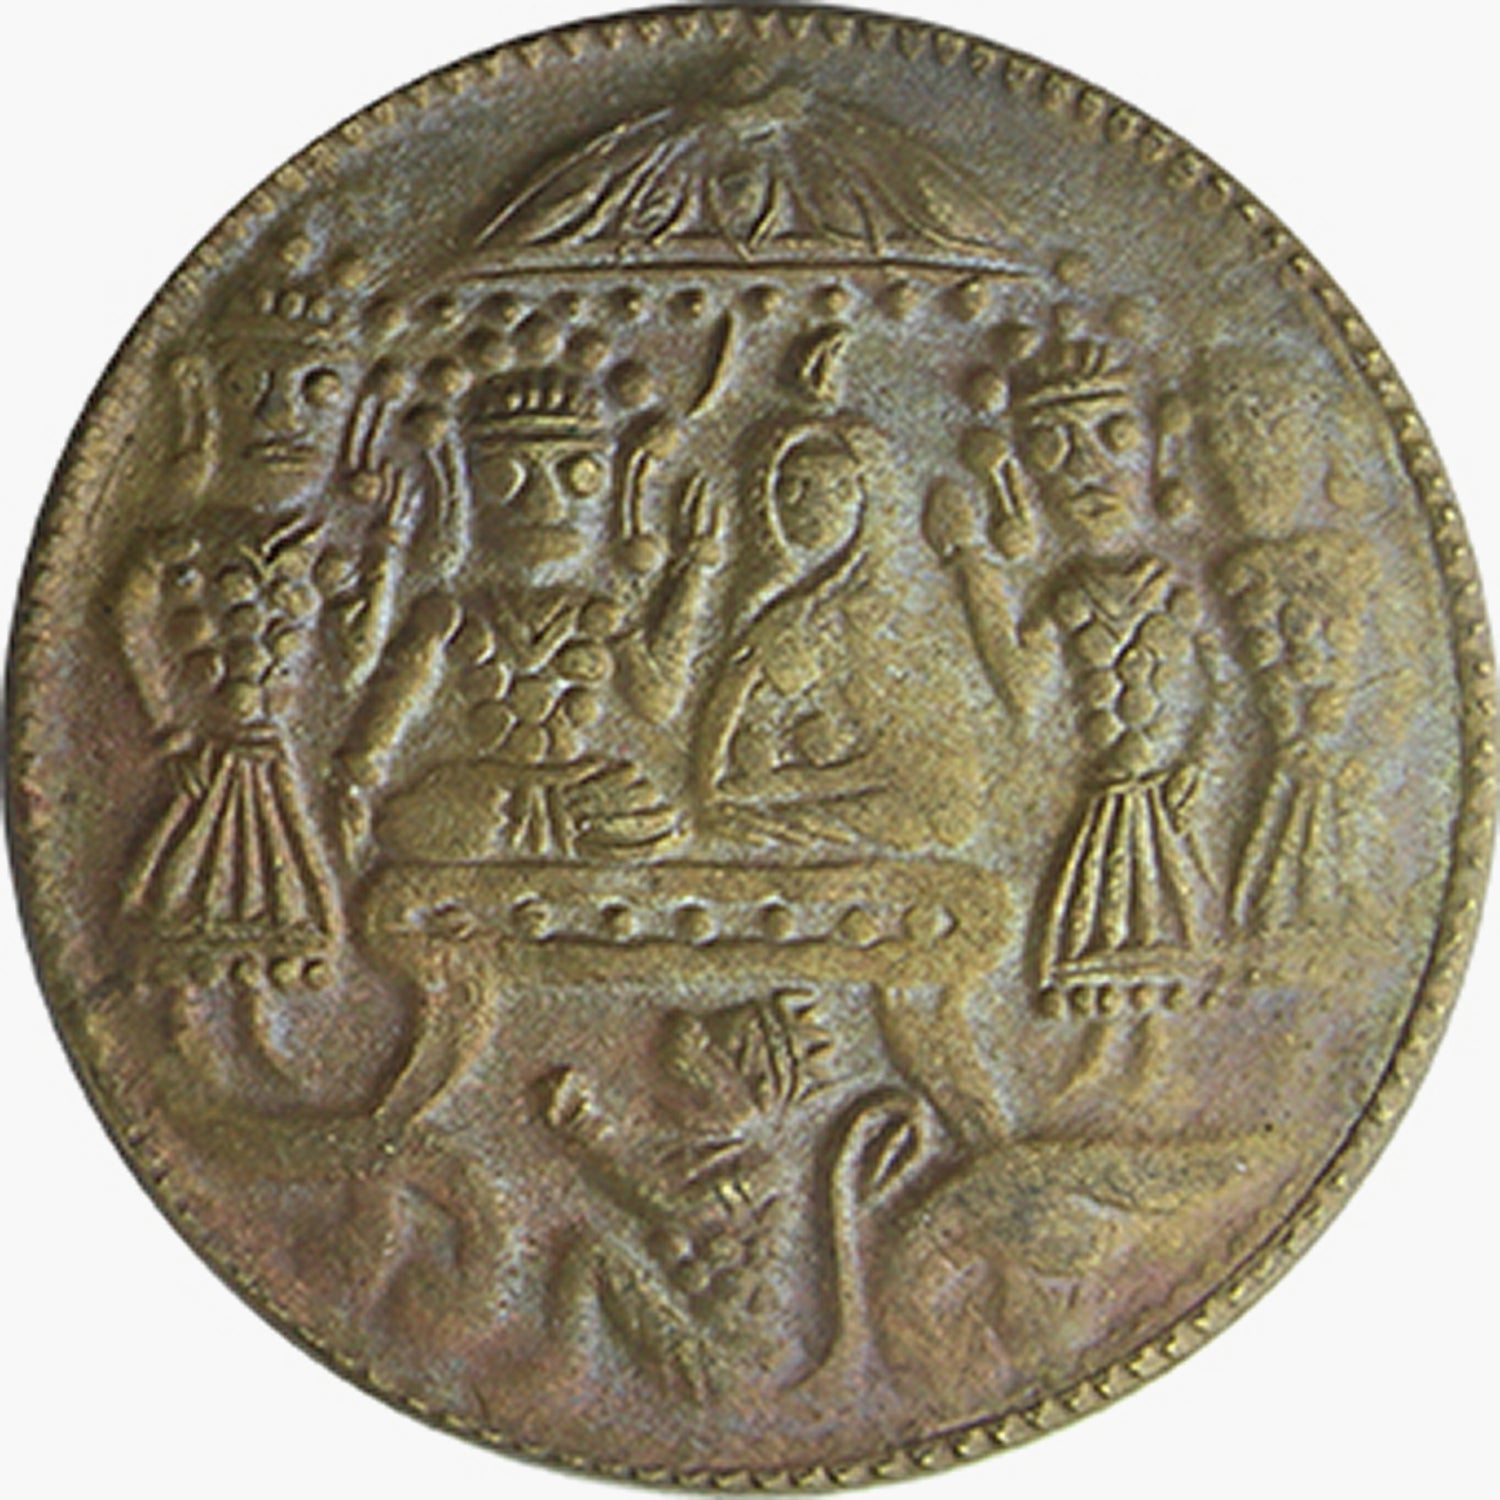 Temple Tokens from Mystic India